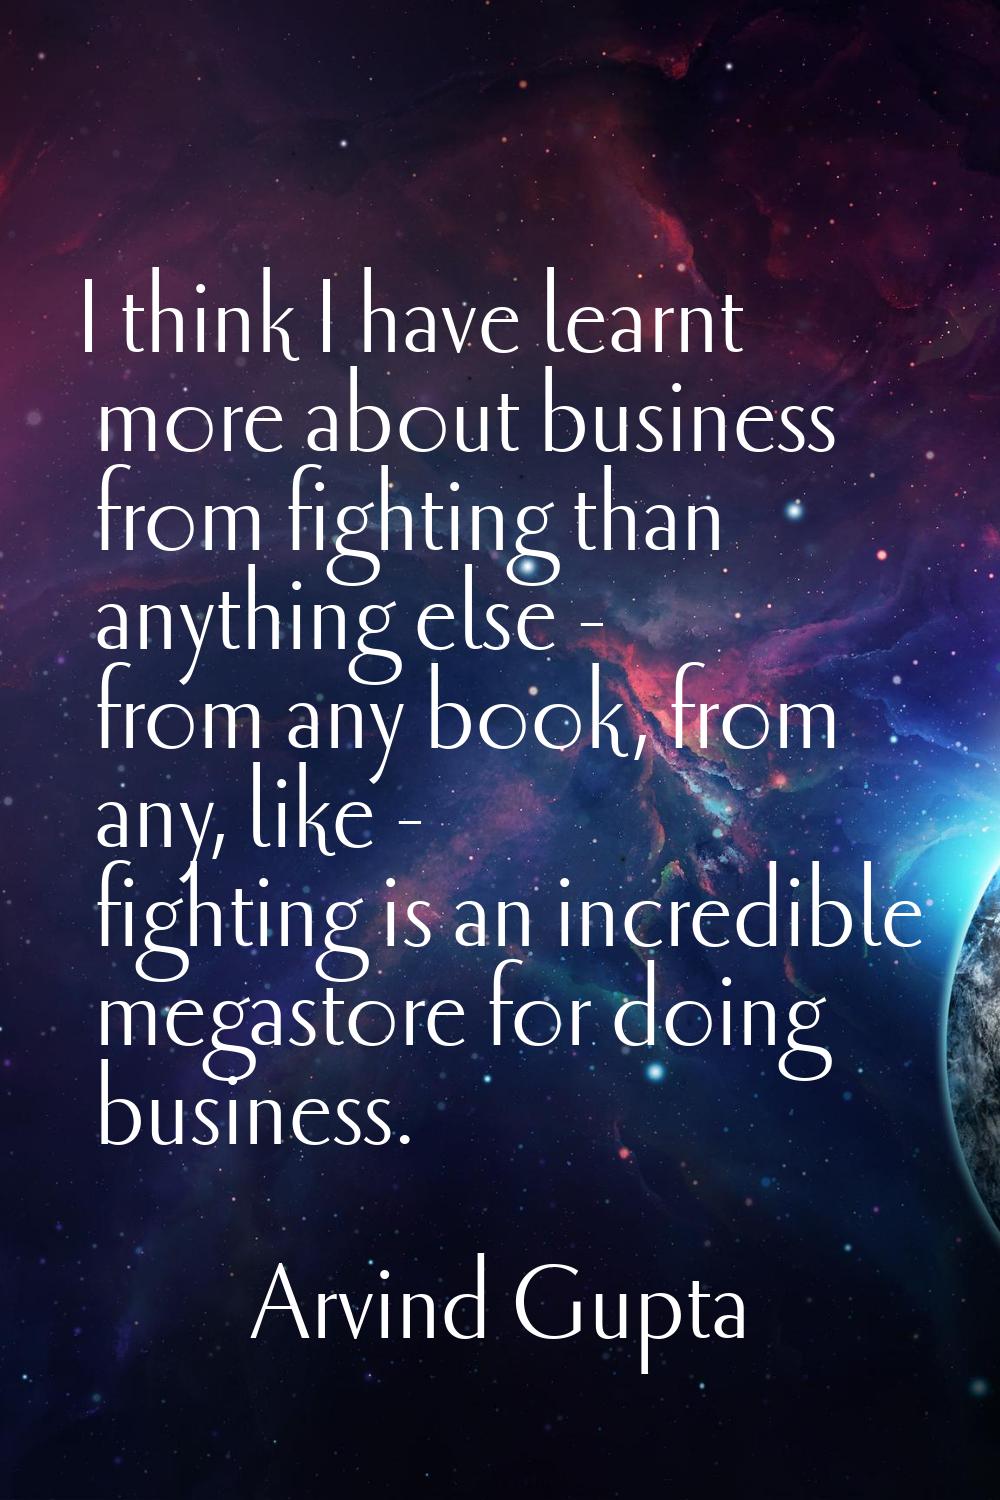 I think I have learnt more about business from fighting than anything else - from any book, from an